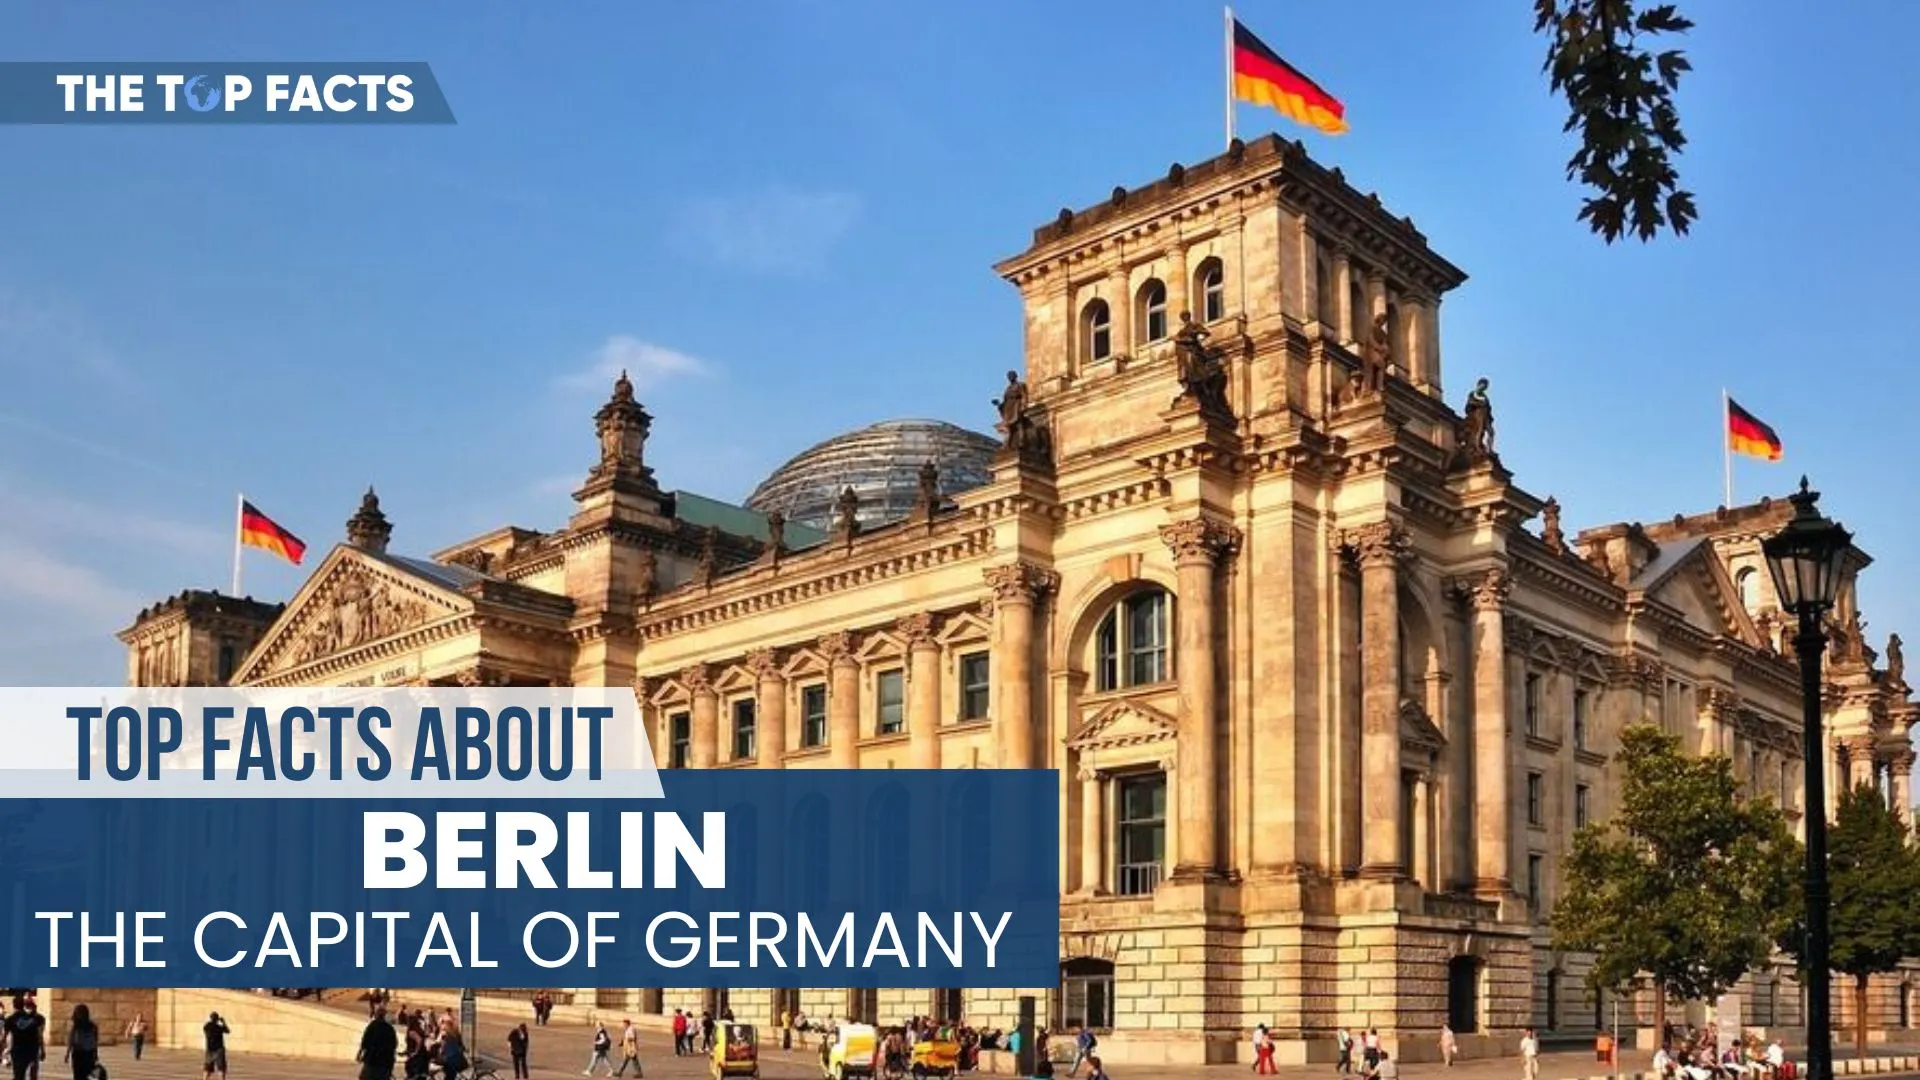 Top Facts About Berlin, the Capital of Germany